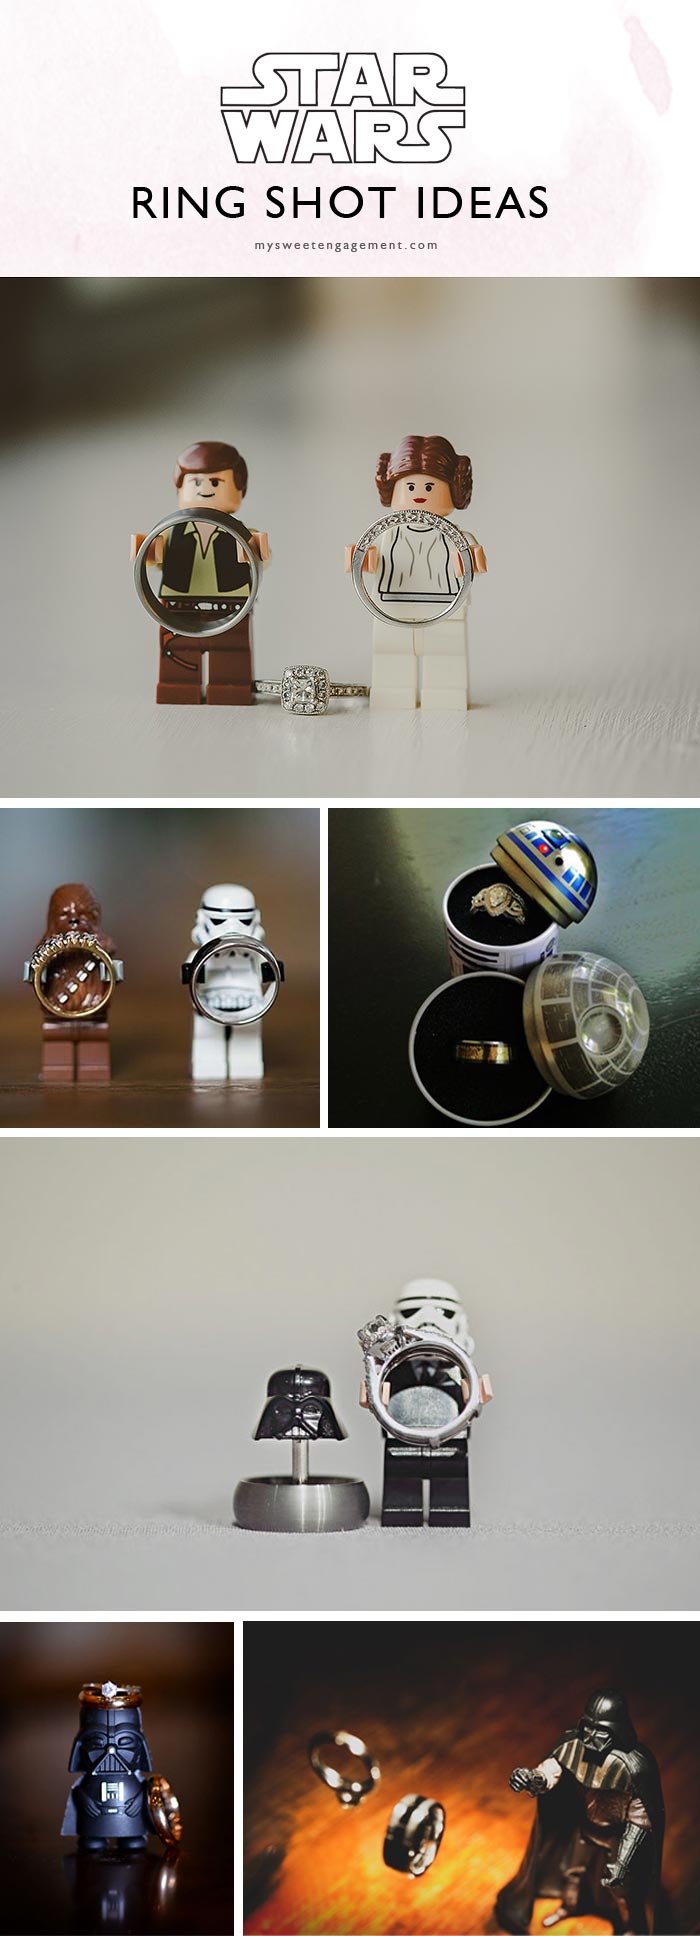 These Star Wars lego figures are really the cutest. Ring shot ideas with Han Solo, Princess Leia, Chewbacca, Stormtrooper, Darth Vader, R2D2 and Death Star ring cases. // You're gonna love this Ultimate Guide for an Epic and Elegant Star Wars Wedding. // http://mysweetengagement.com